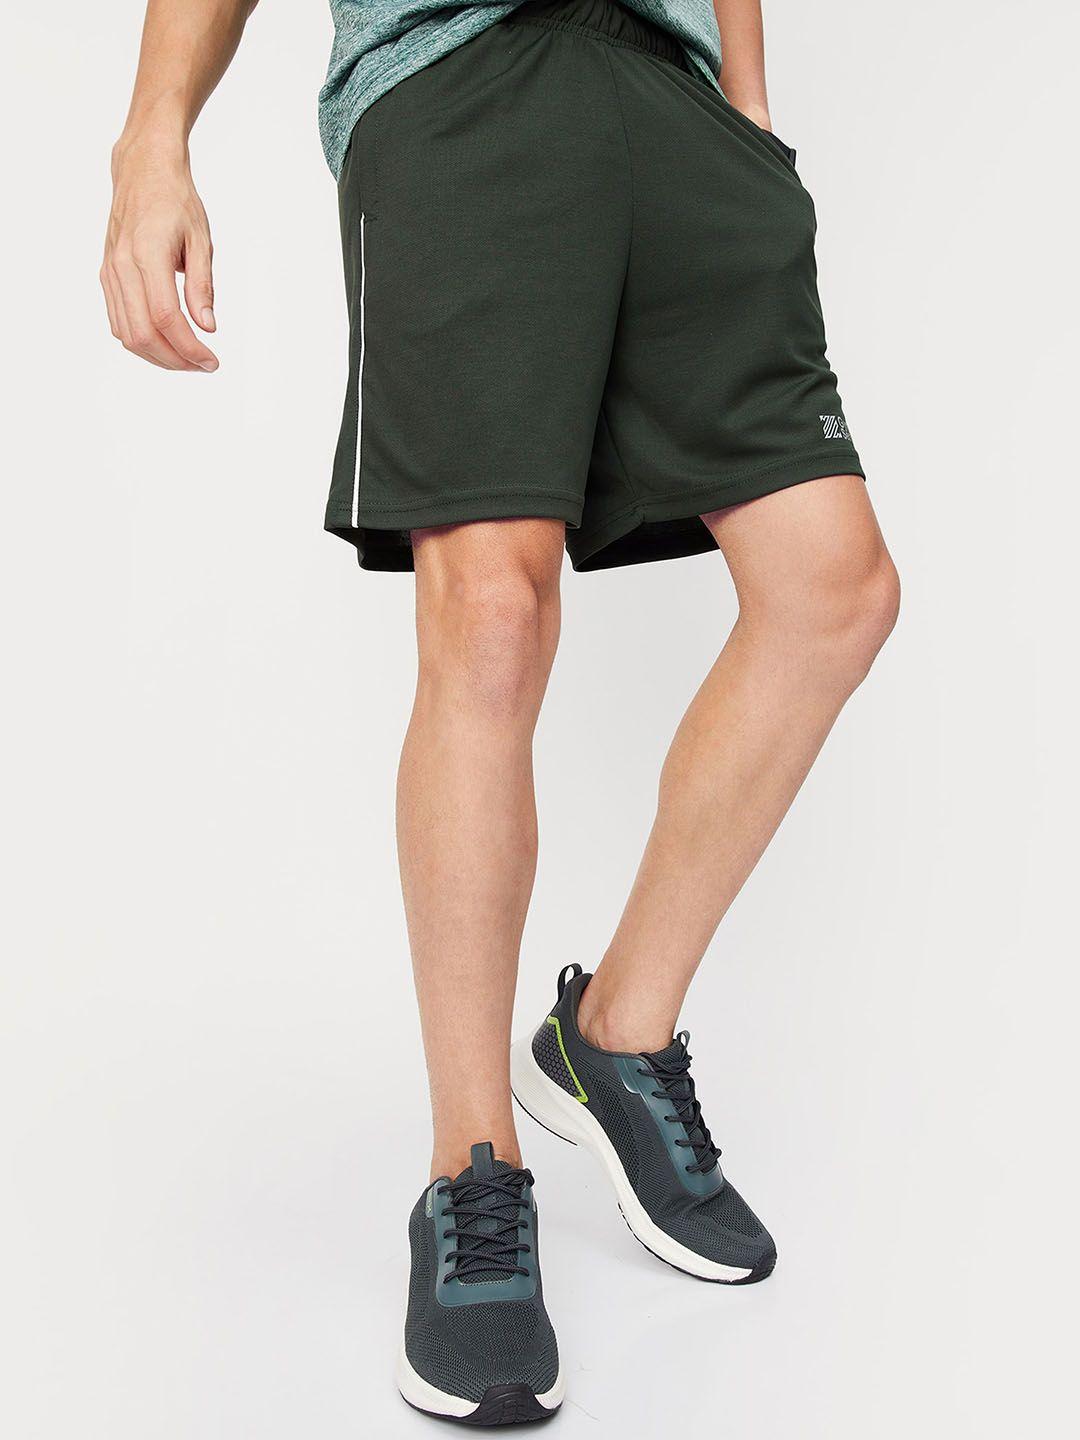 max men olive green solid sports shorts